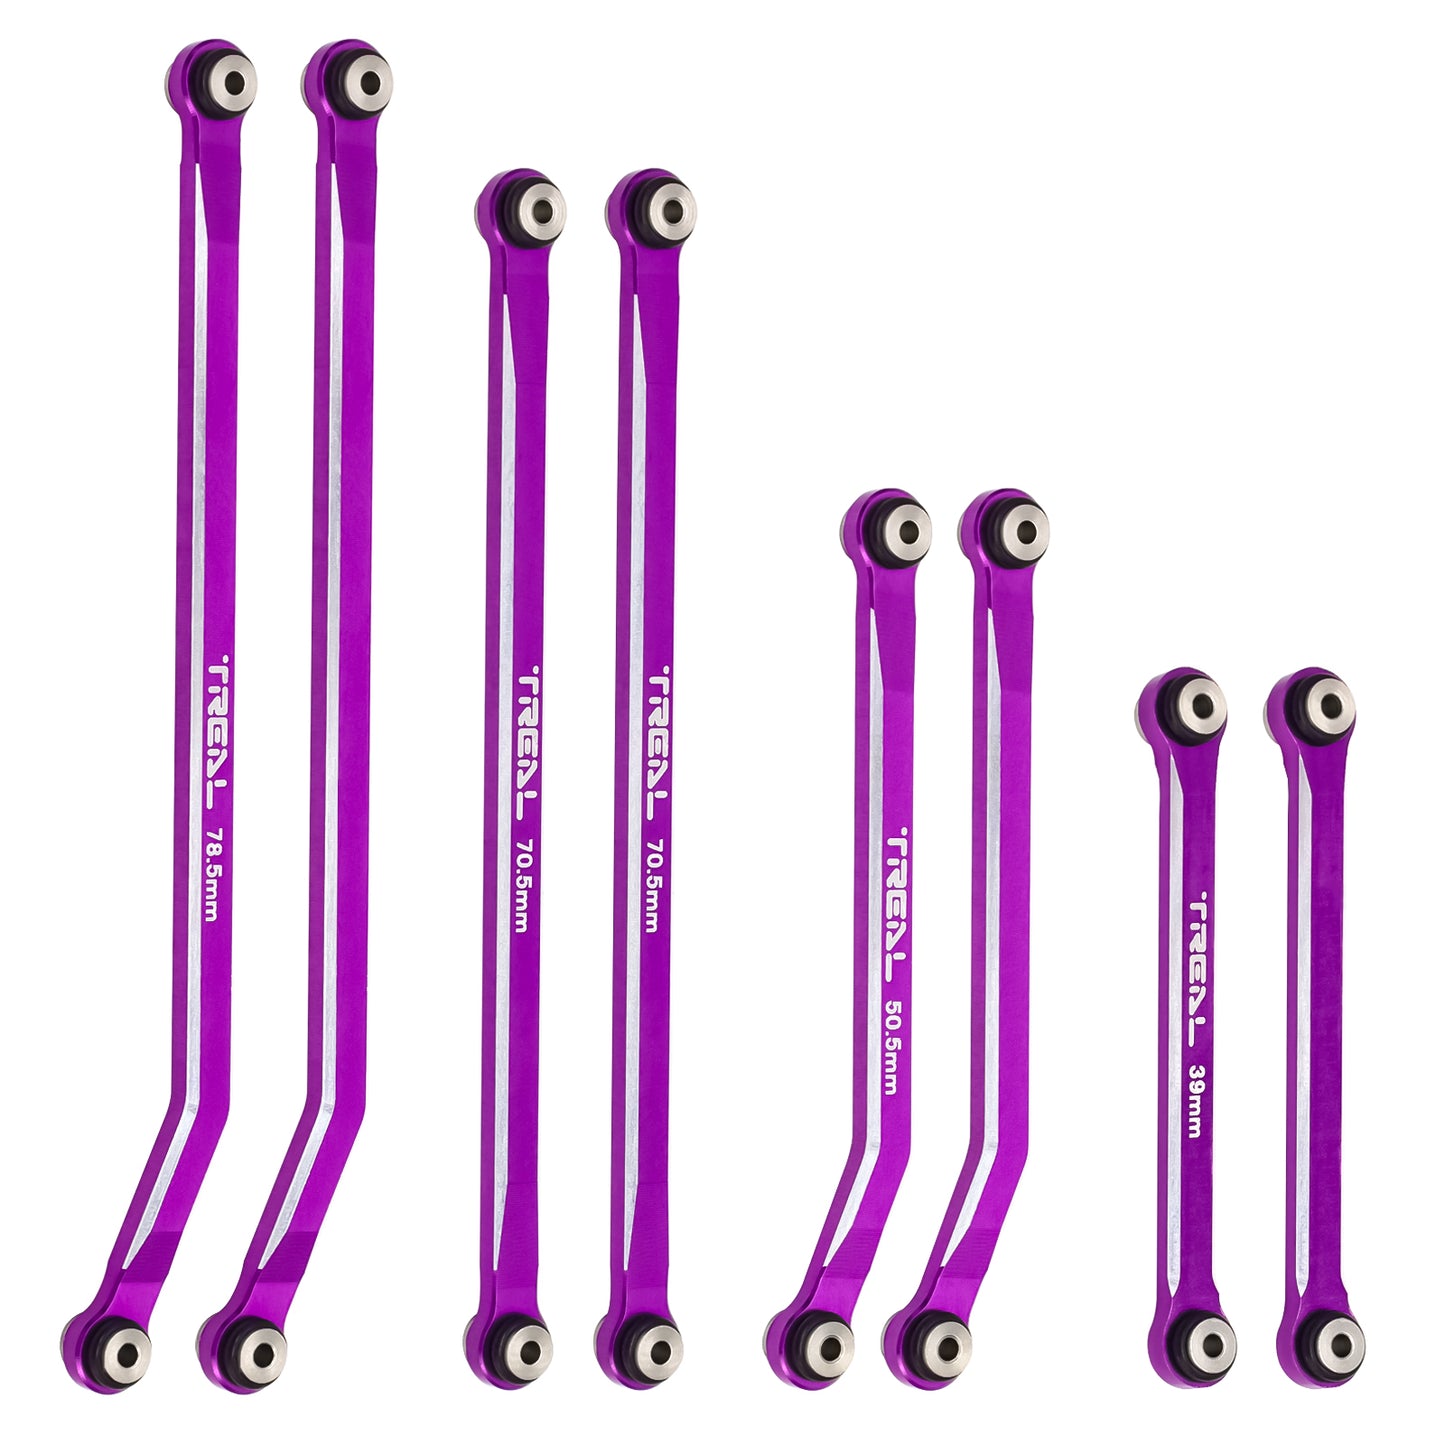 TREAL SCX24 High Clearance Links 4-Links Design (8pcs) Aluiminum 7075 for Axial SCX24 Gladiator